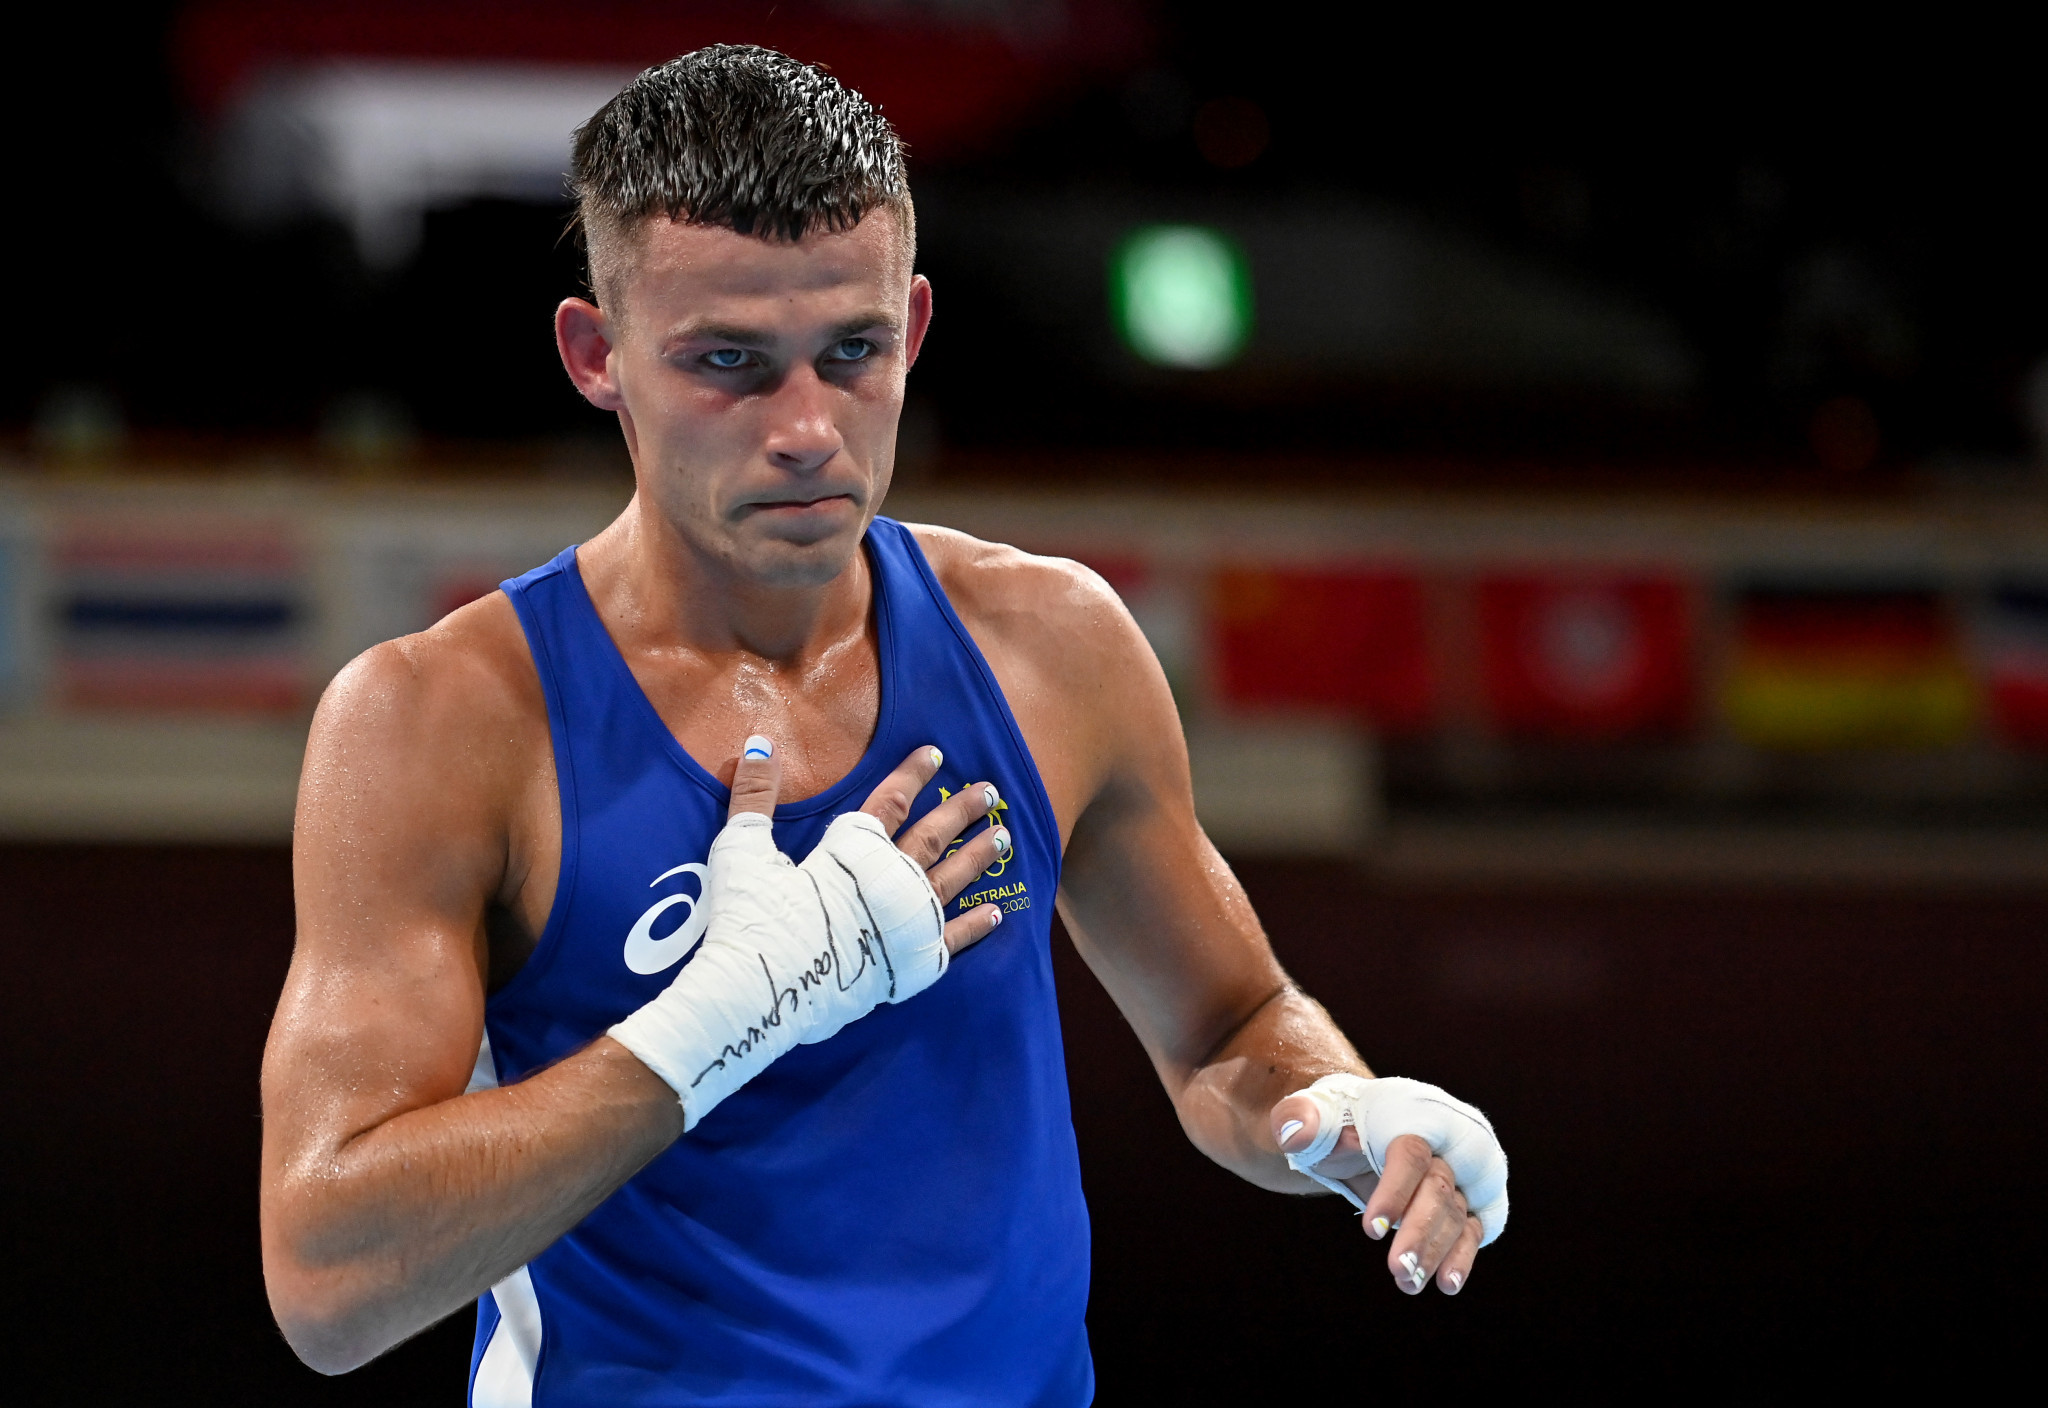 Australian Olympic boxing medallist Garside charged with assault